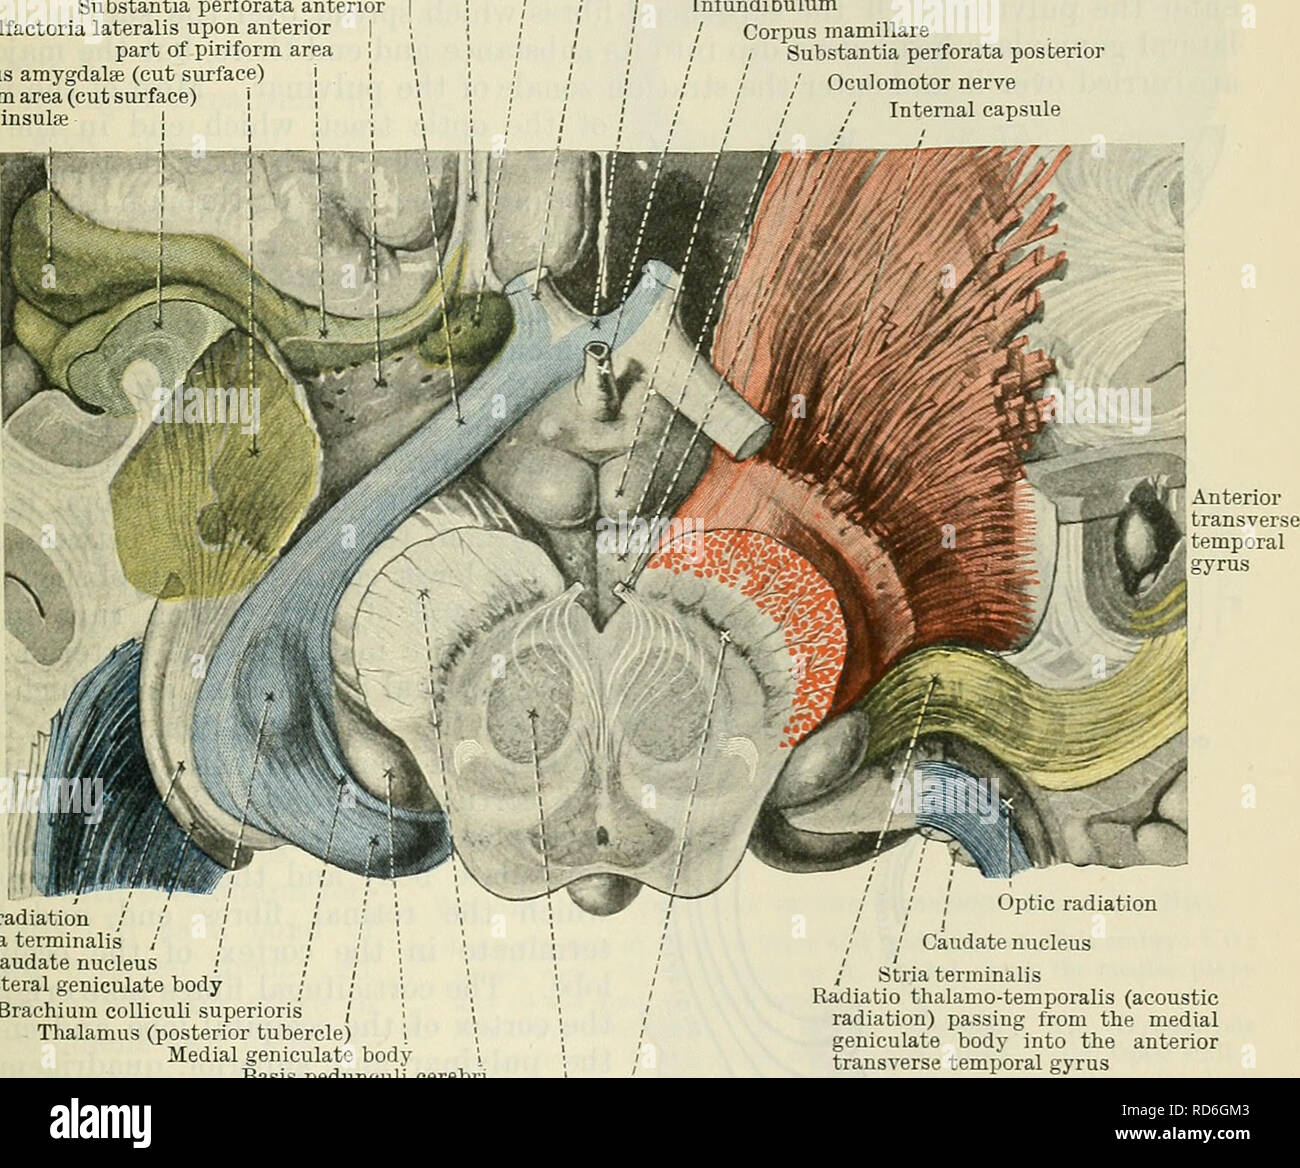 . Cunningham's Text-book of anatomy. Anatomy. CEEEBEAL CONNEXIONS OF THE OPTIC TEACT. 619 Ceeebkal Connexions of the Optic Tract. The optic nerve is connected with the hypothalamus. At the optic chiasma the optic nerves of the two sides are joined together and a partial decussation of fibres takes place. The fibres which arise in the medial half of each retina cross the median plane and join the optic tract of the opposite side. The optic tract proceeds backwards round the cerebral peduncle, and in the neighbour- hood of the geniculate bodies appears to divide into two roots, viz., a lateral a Stock Photo